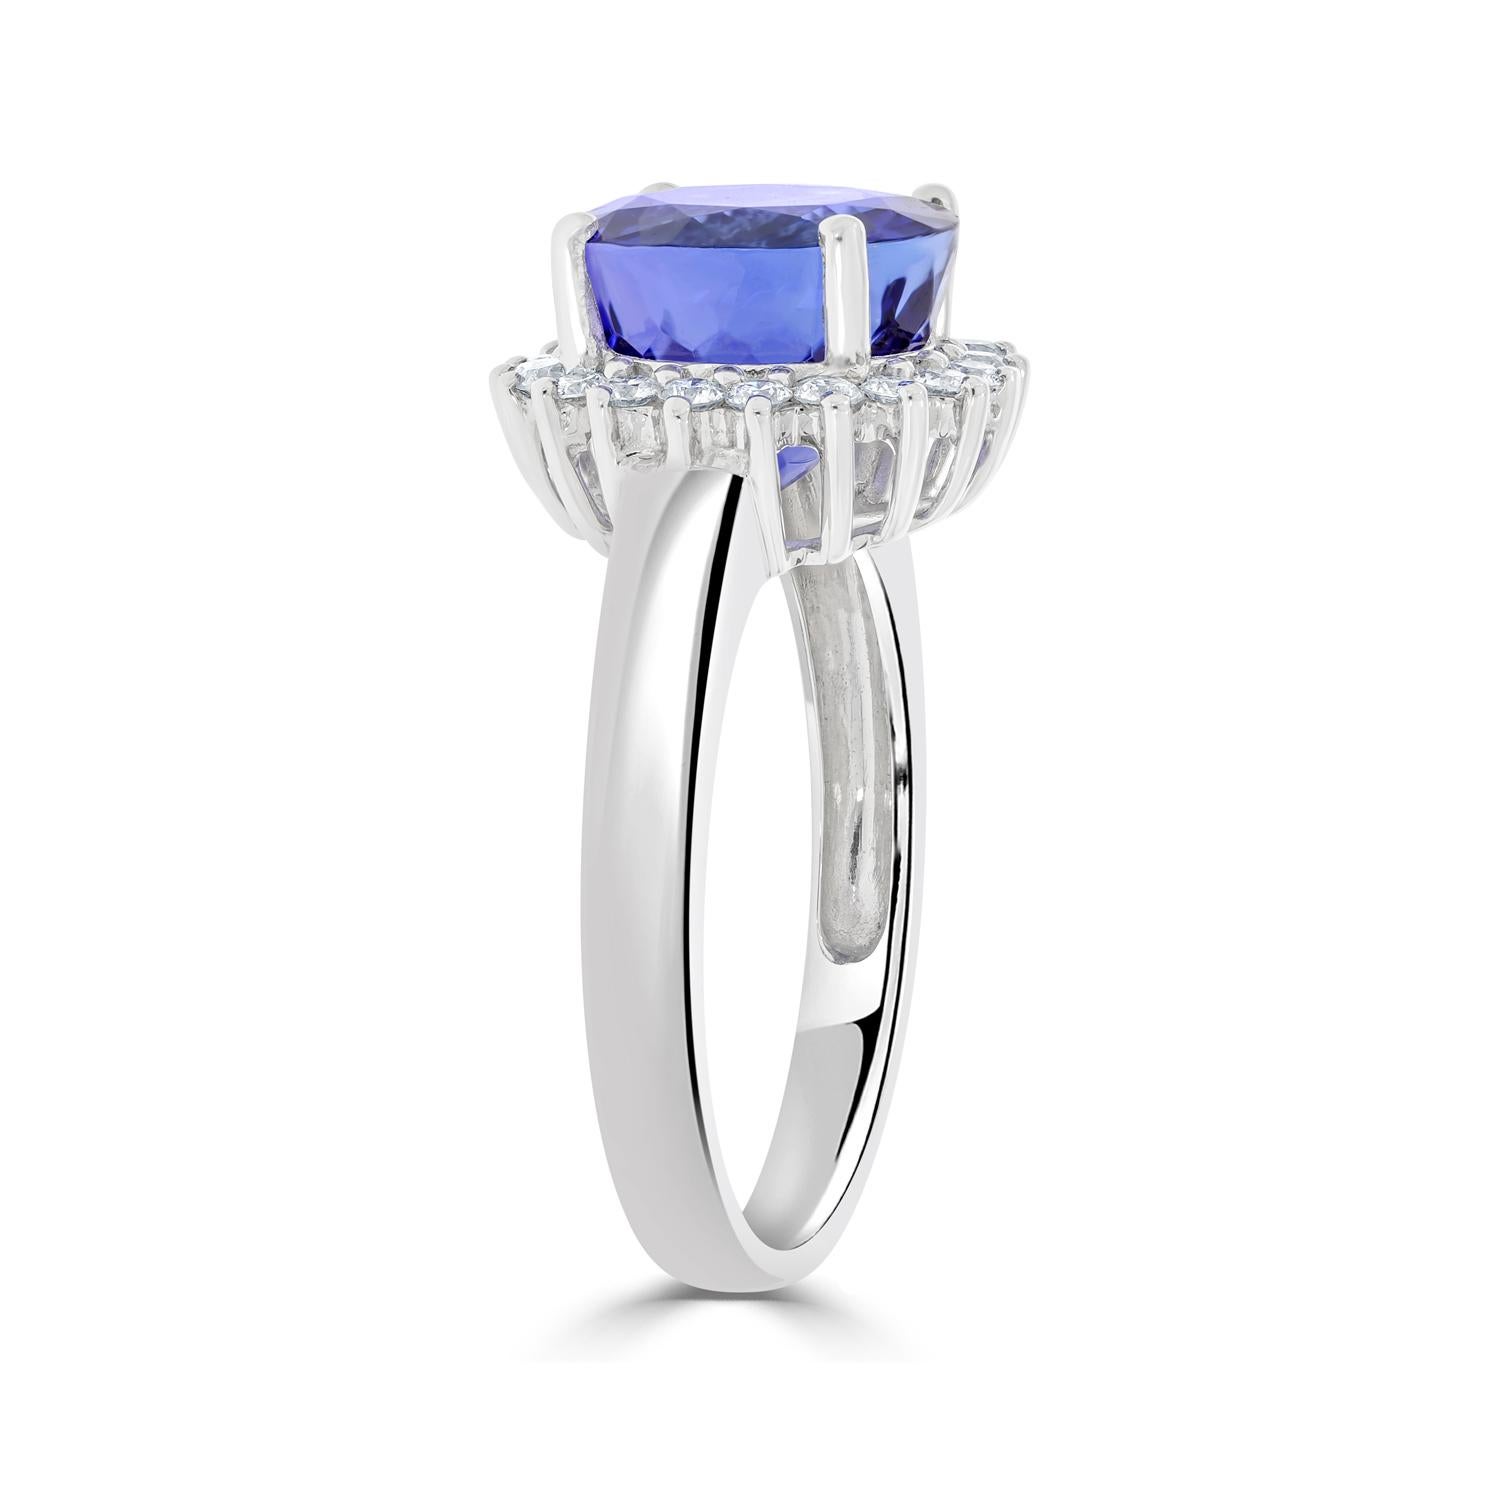 Don't Miss Out On This Artful Ring That'll Look Good With Every Style Outfit And Suit Every Occasion. The Top-notch Work With 18kt White Gold Offers A Trendy Look. Set With Tanzanite And Round Diamonds, The Ring Will Brighten Up Your Style Like